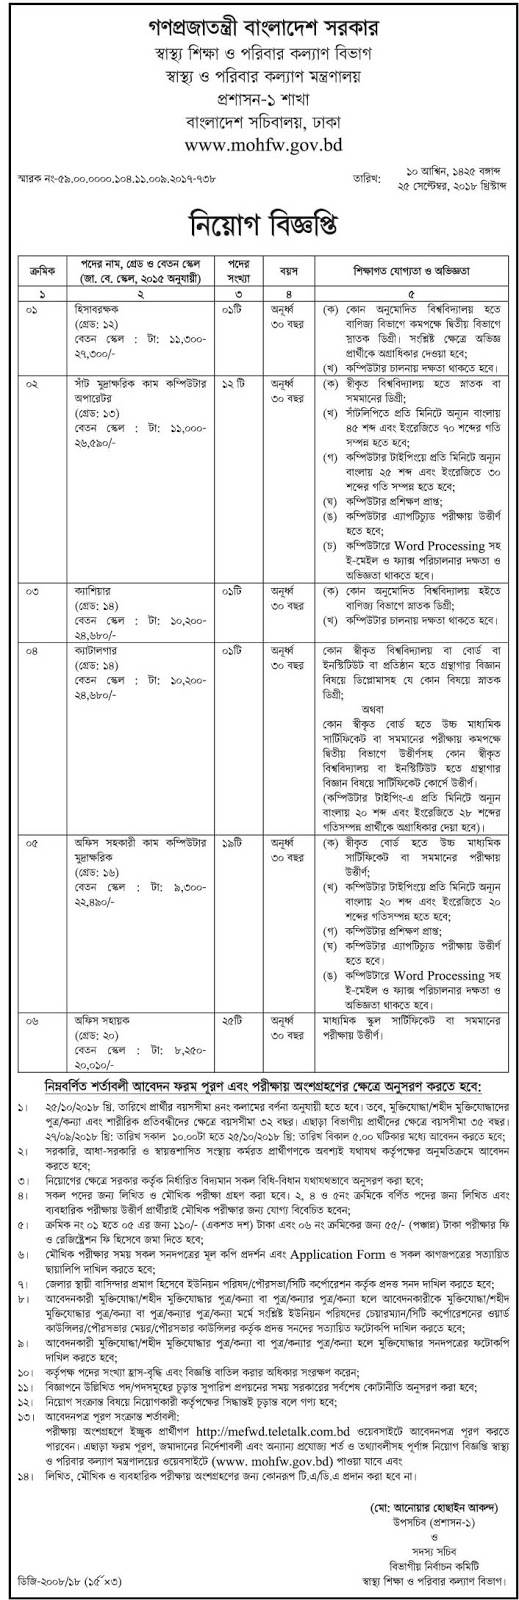 Ministry of Health and Family Welfare (MOHFW) job circular 2018